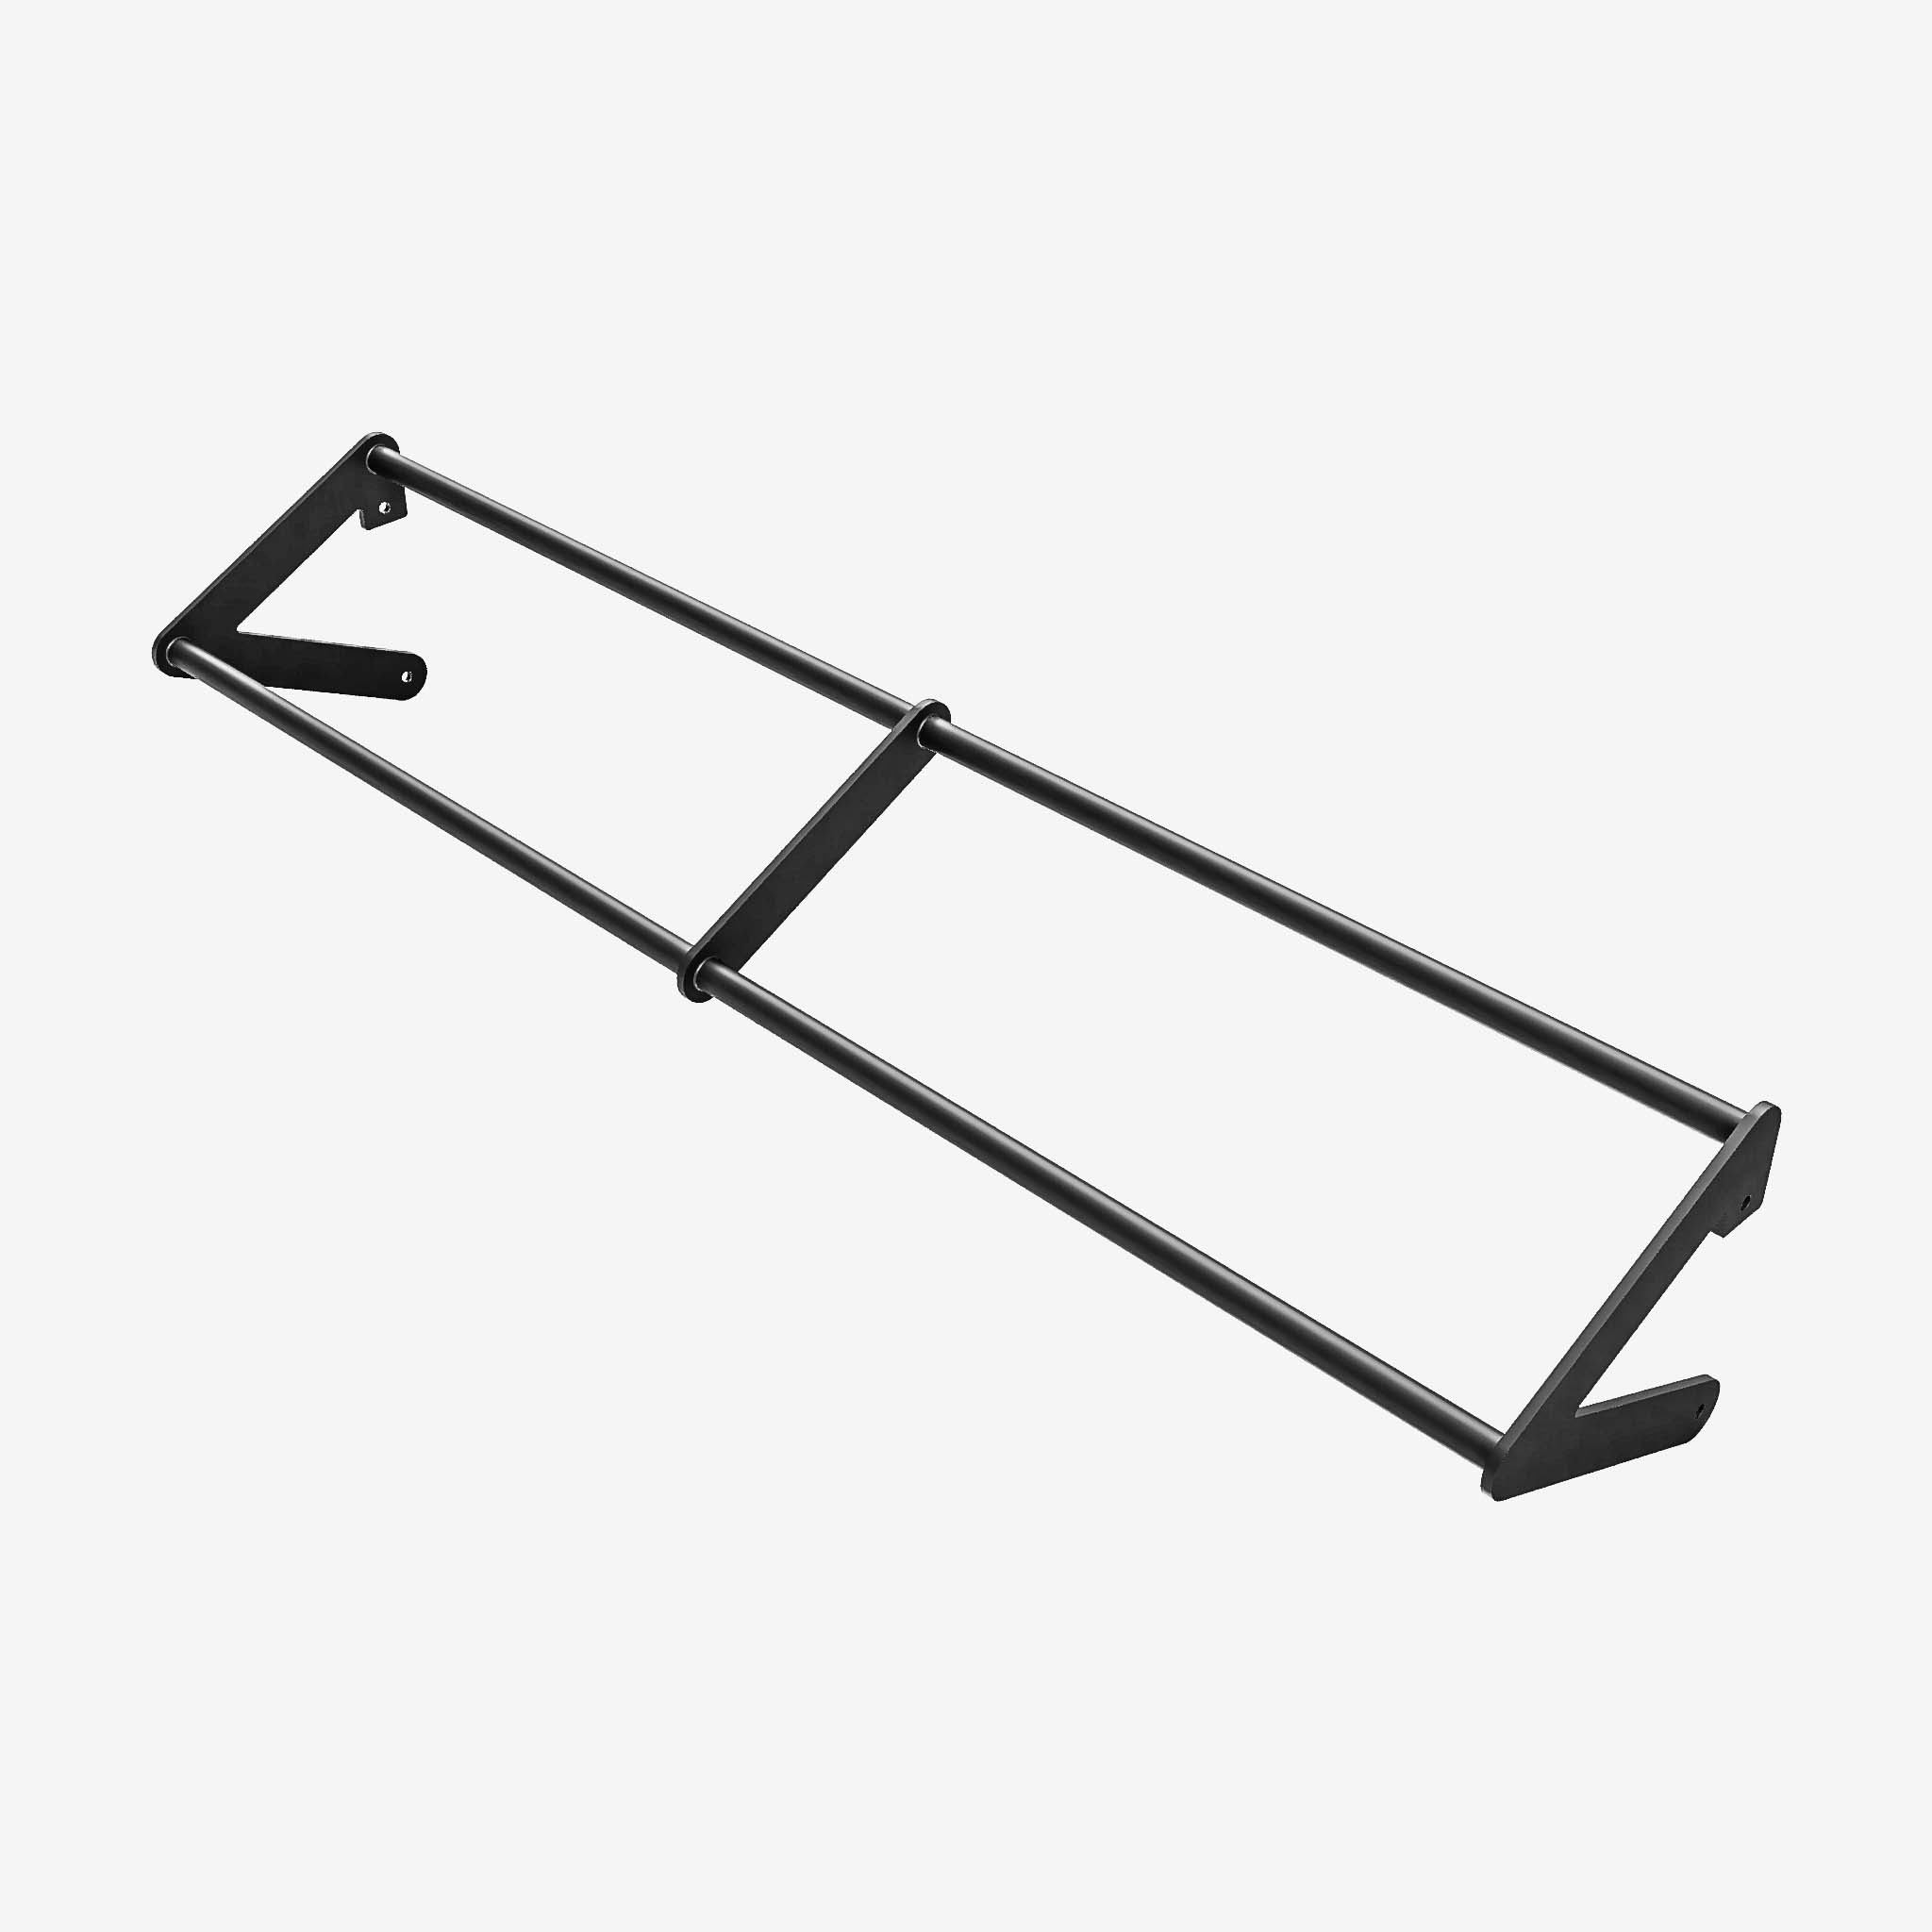 Featured image for “Triangle Chin Bar 1800mm”